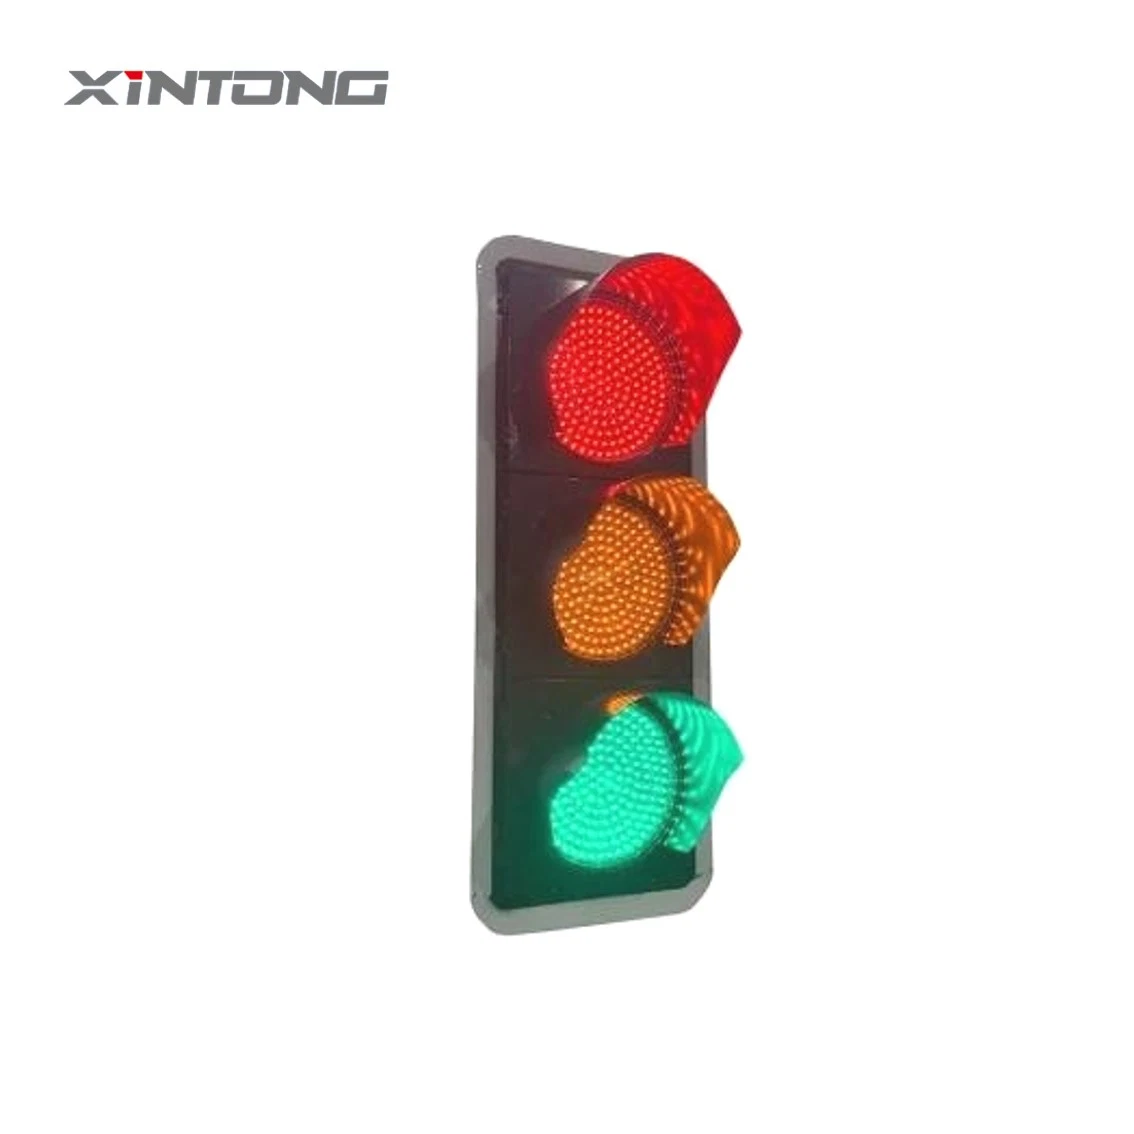 Xintong 200/300/400mm Intelligent LED Traffic Signal Light with Countdown Timer for Vehicle